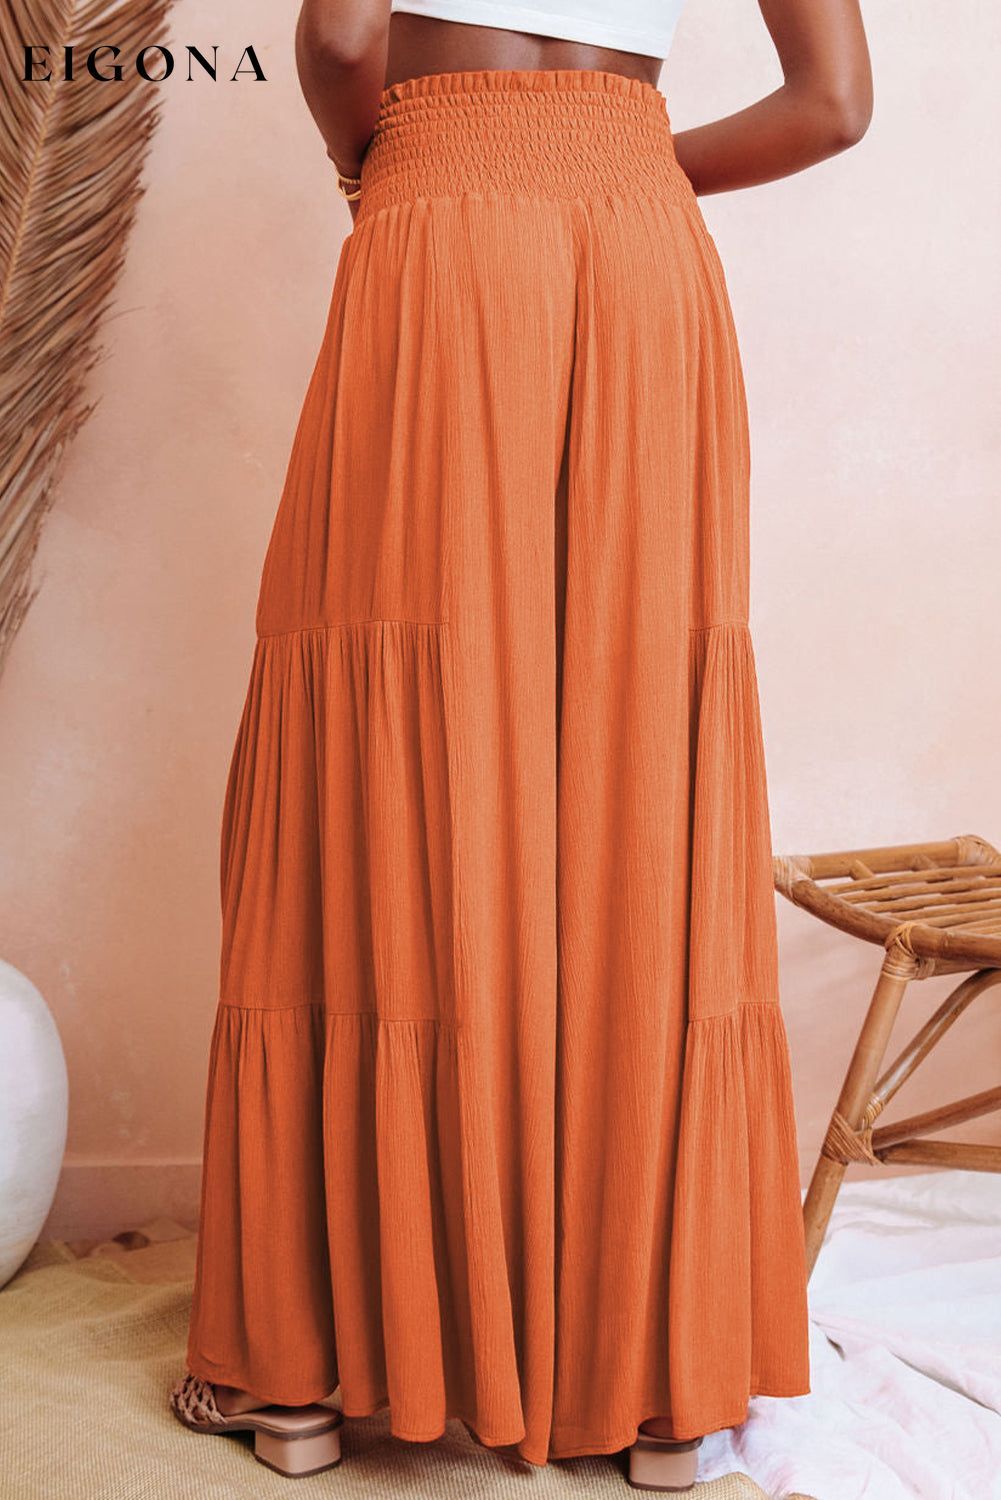 Orange Smocked Waist Tiered Wide Leg Pants bottom bottoms clothes Craft Smocked Occasion Vacation pants Season Summer Style Casual wide leg pants